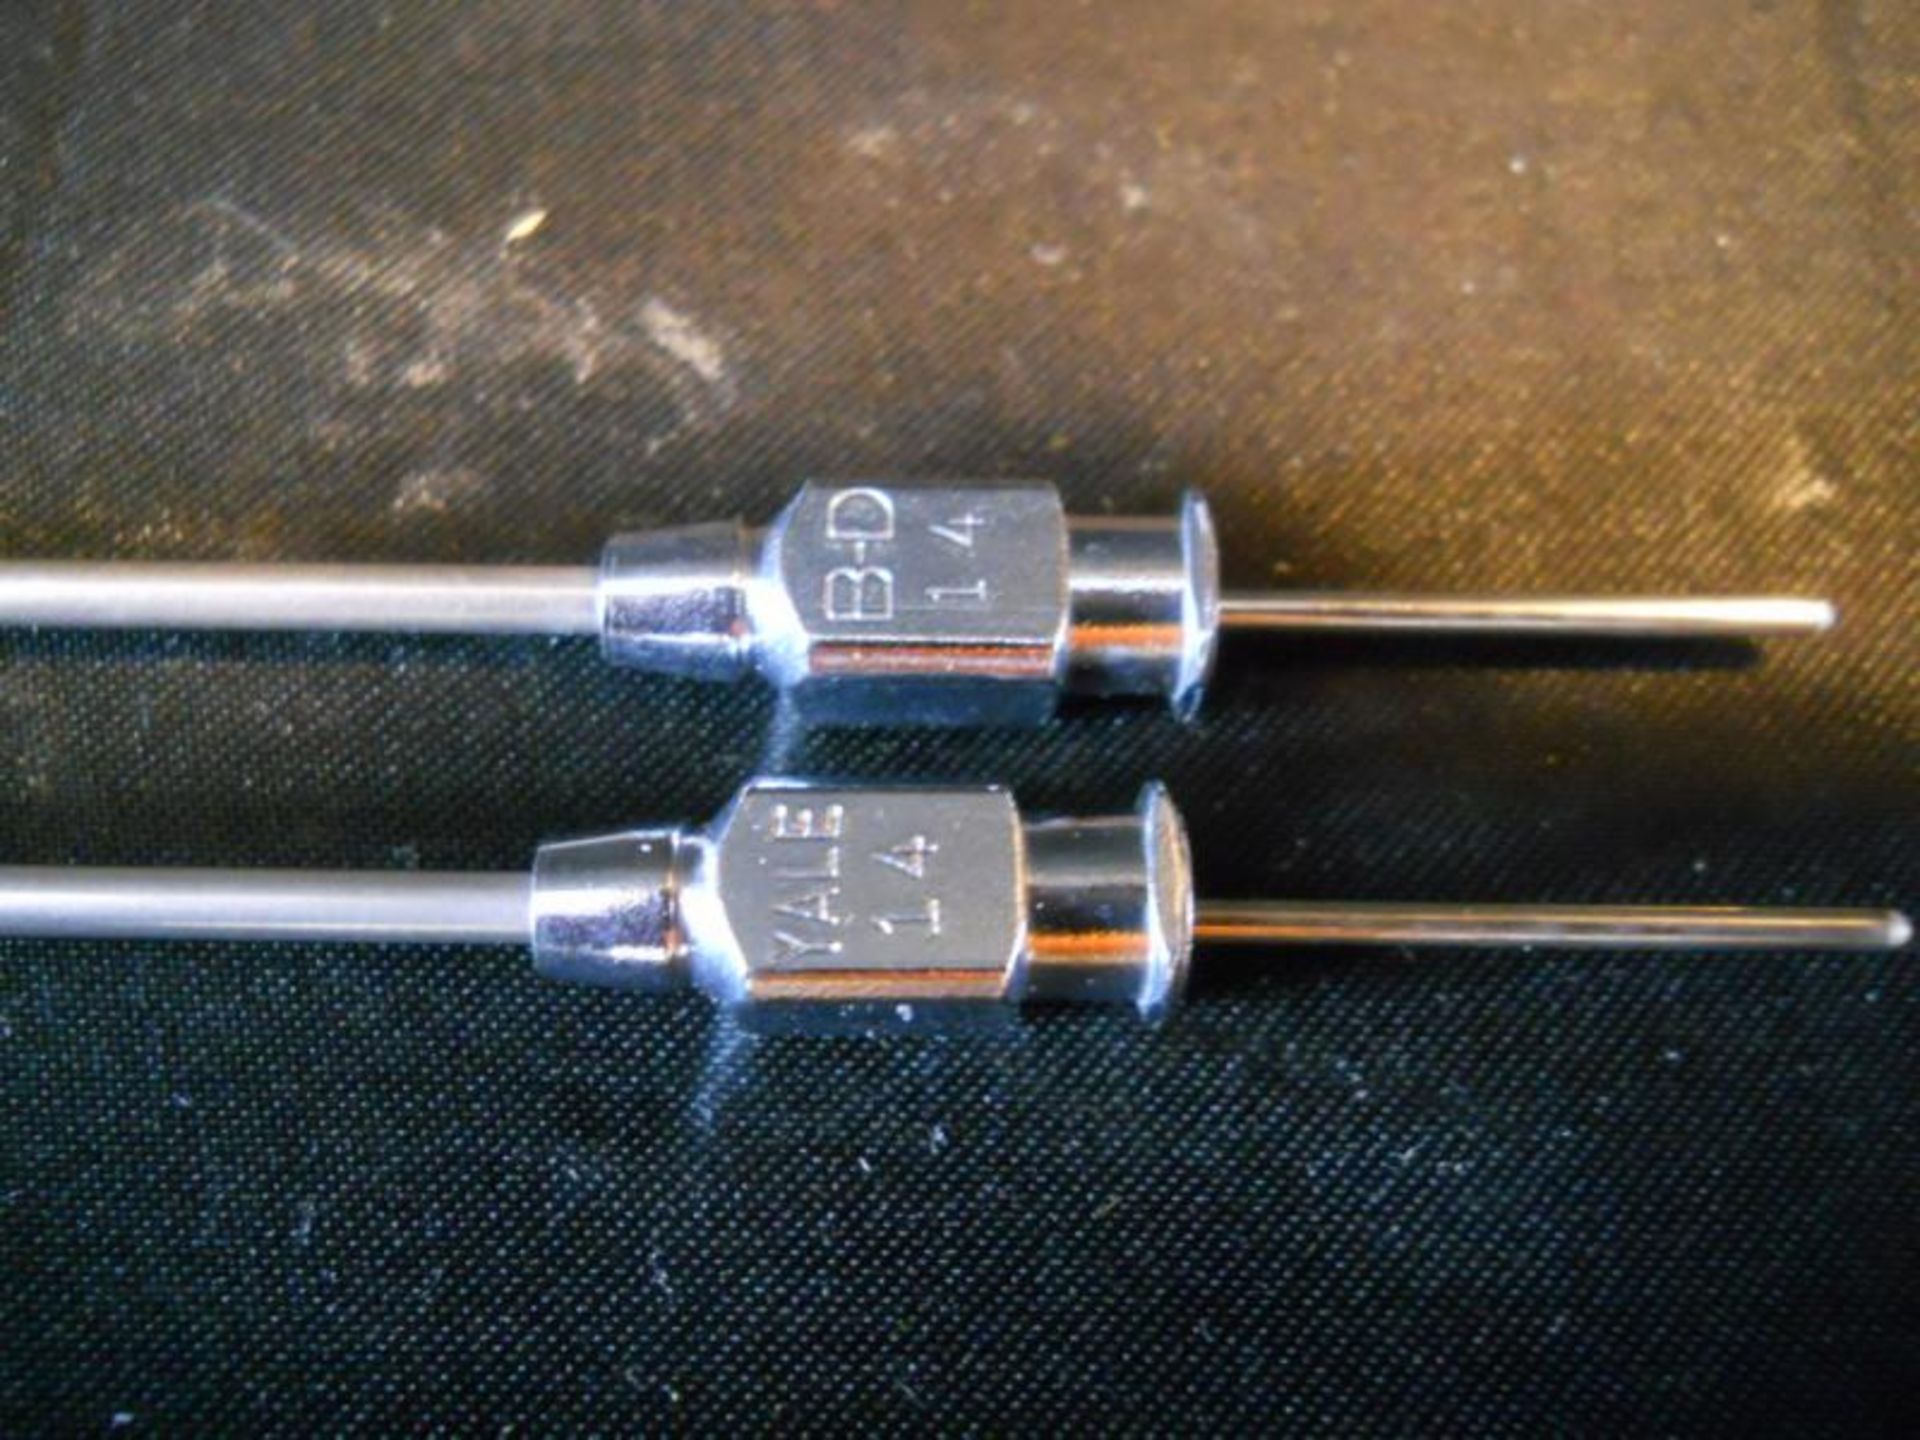 Lot of 2 Becton Dickinson B-D BD 14 Gauge 4" Laboratory Cannula 1789 1250NR, Qty 1, 331030762779 - Image 5 of 5